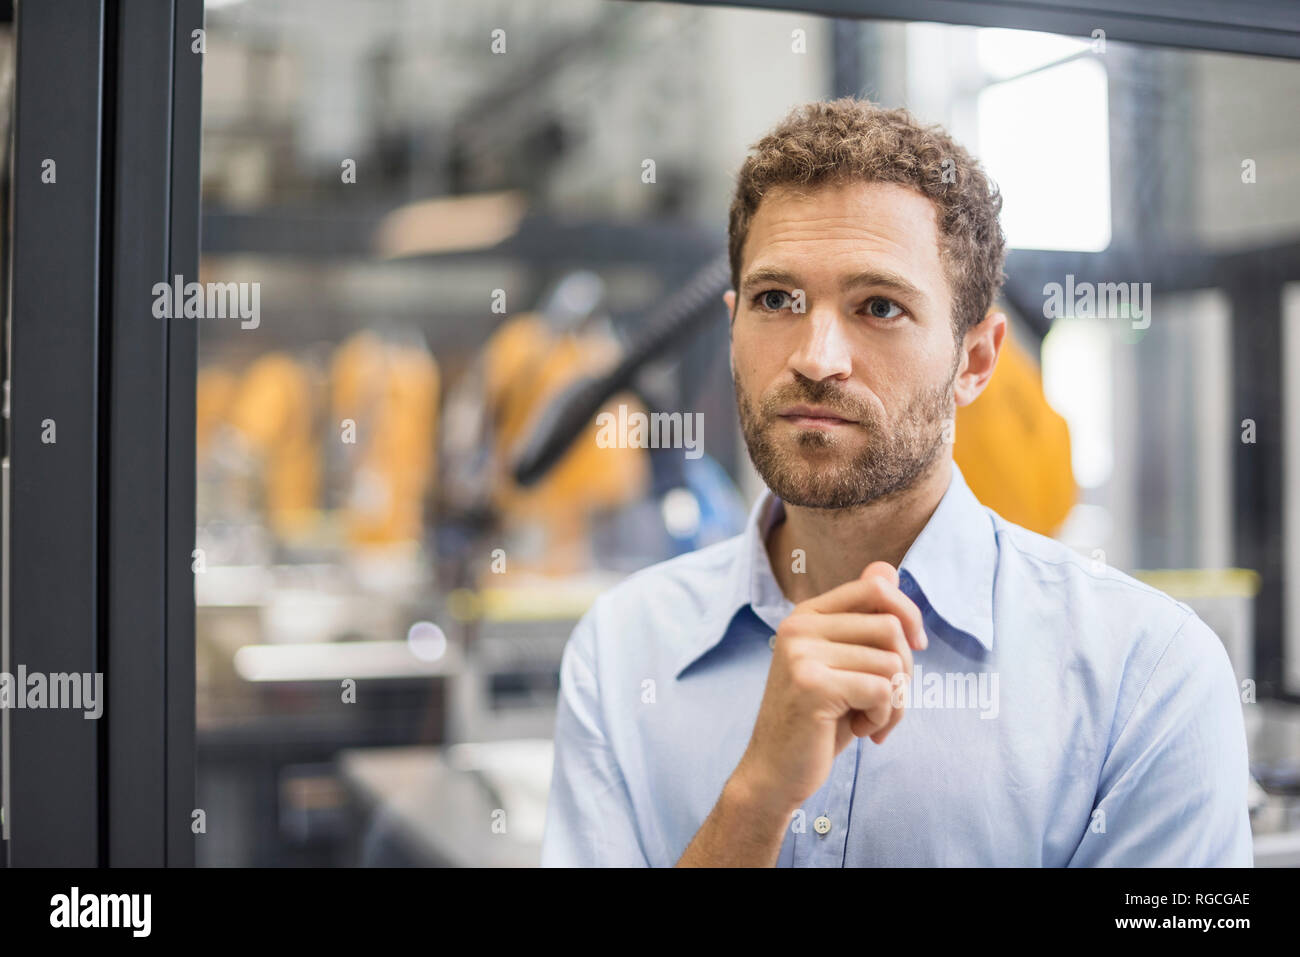 Businessman working in high tech company, portrait Stock Photo